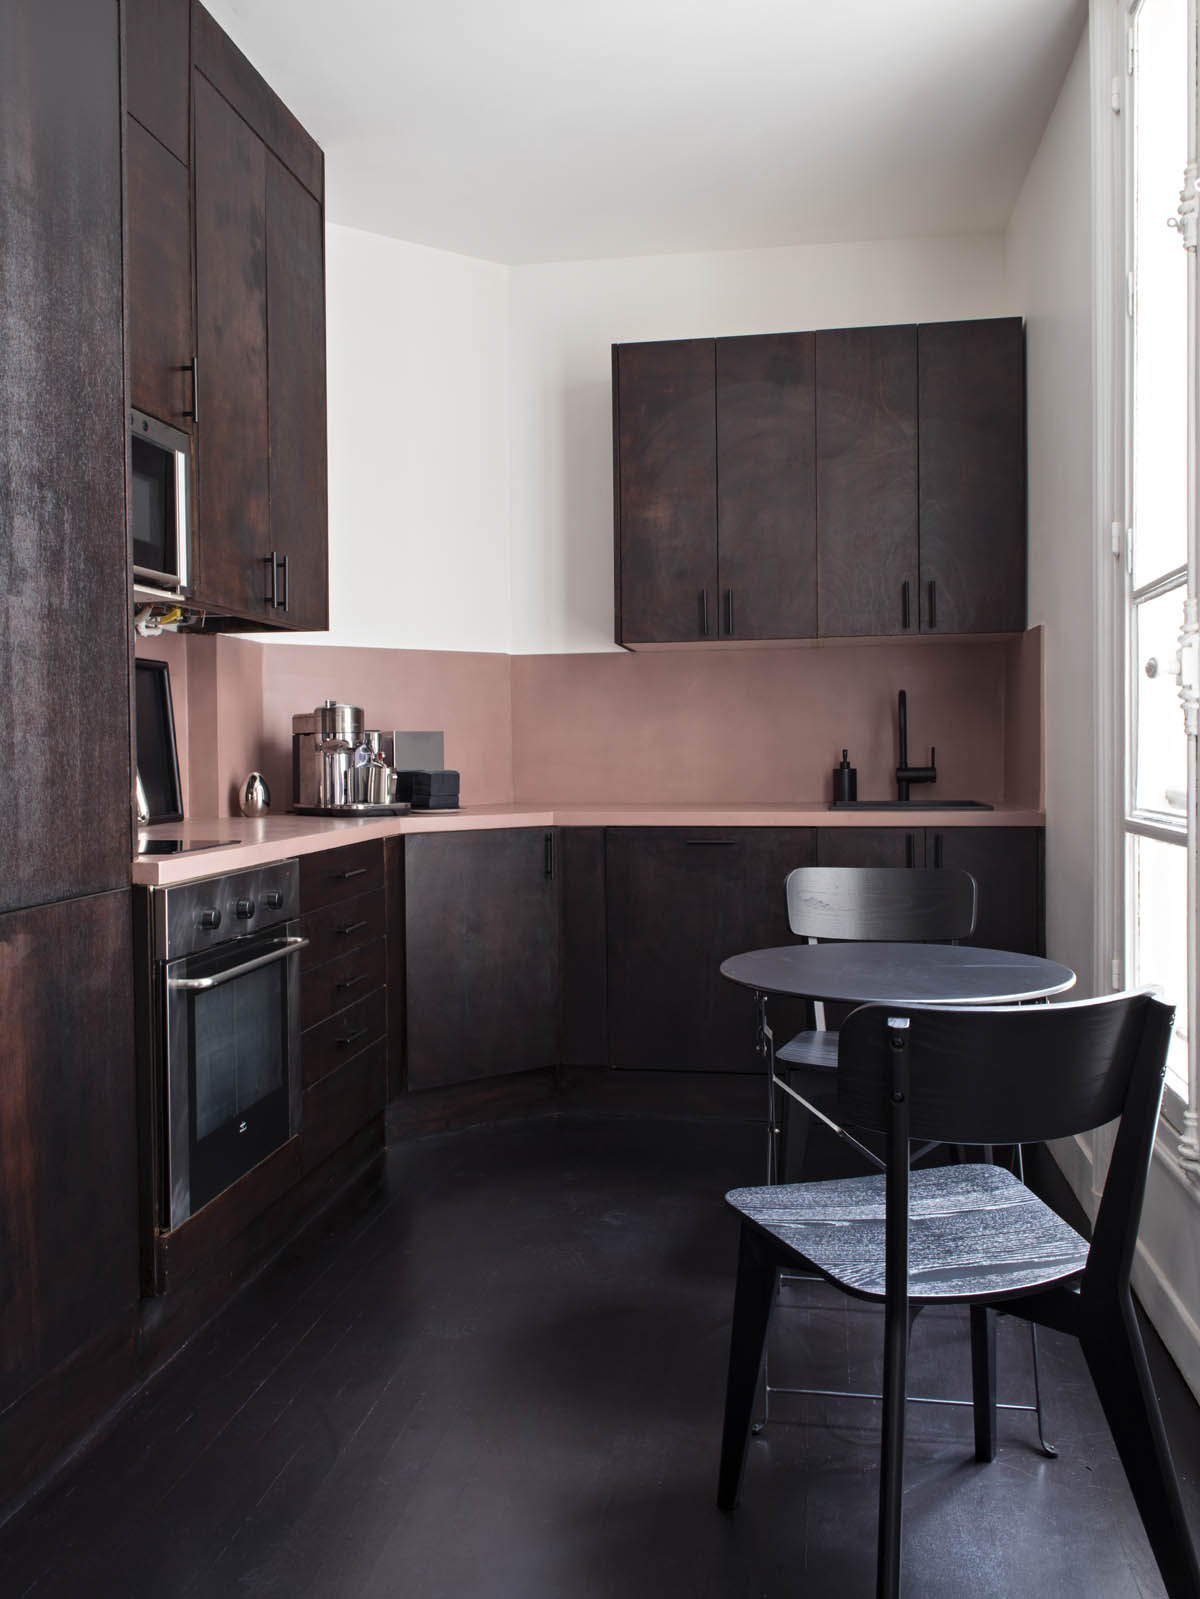 Kitchen with pink limewashed walls in the offices of Youssef Marquis agency